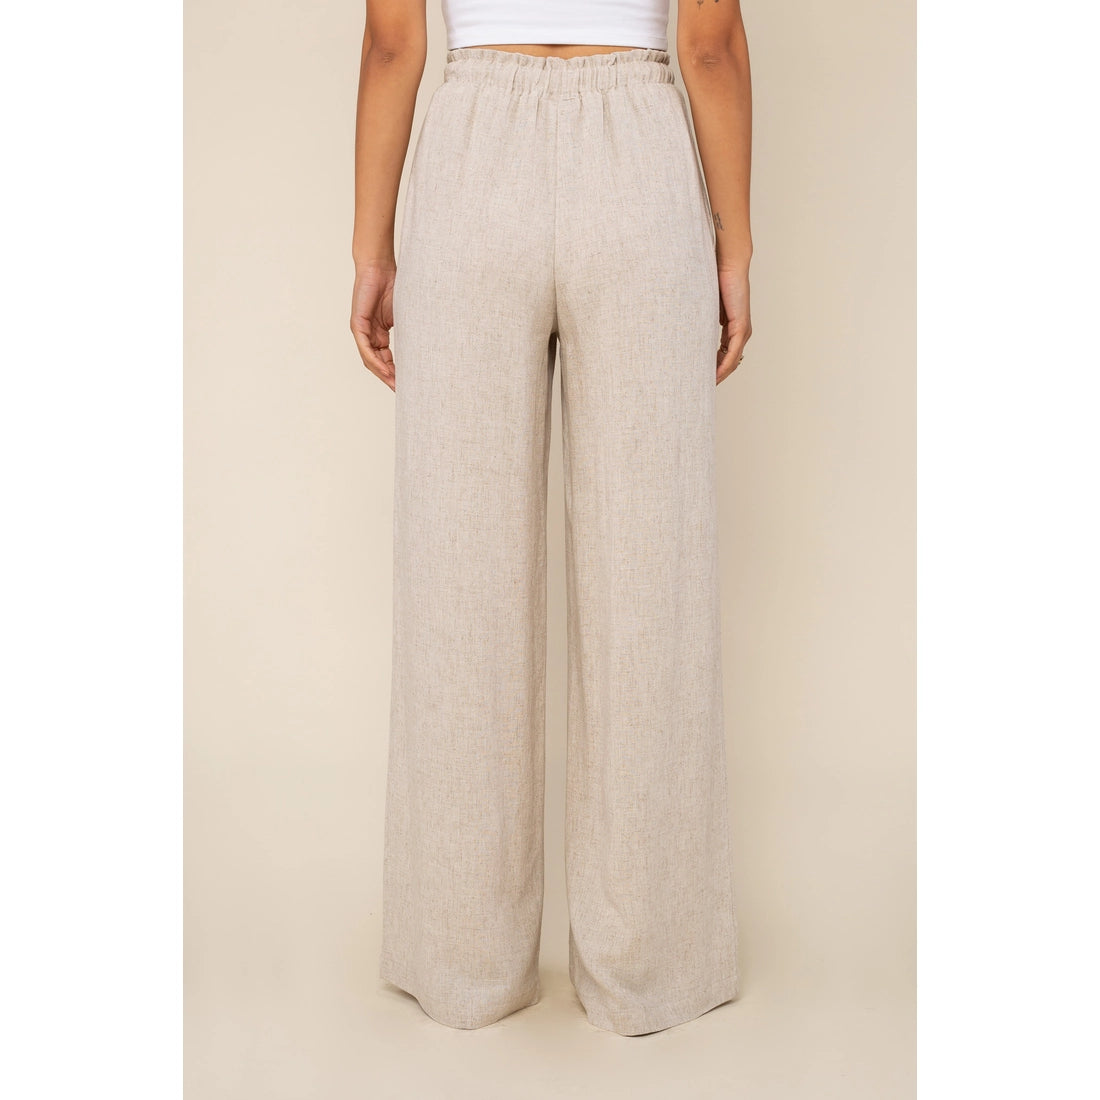 The Cove Pant